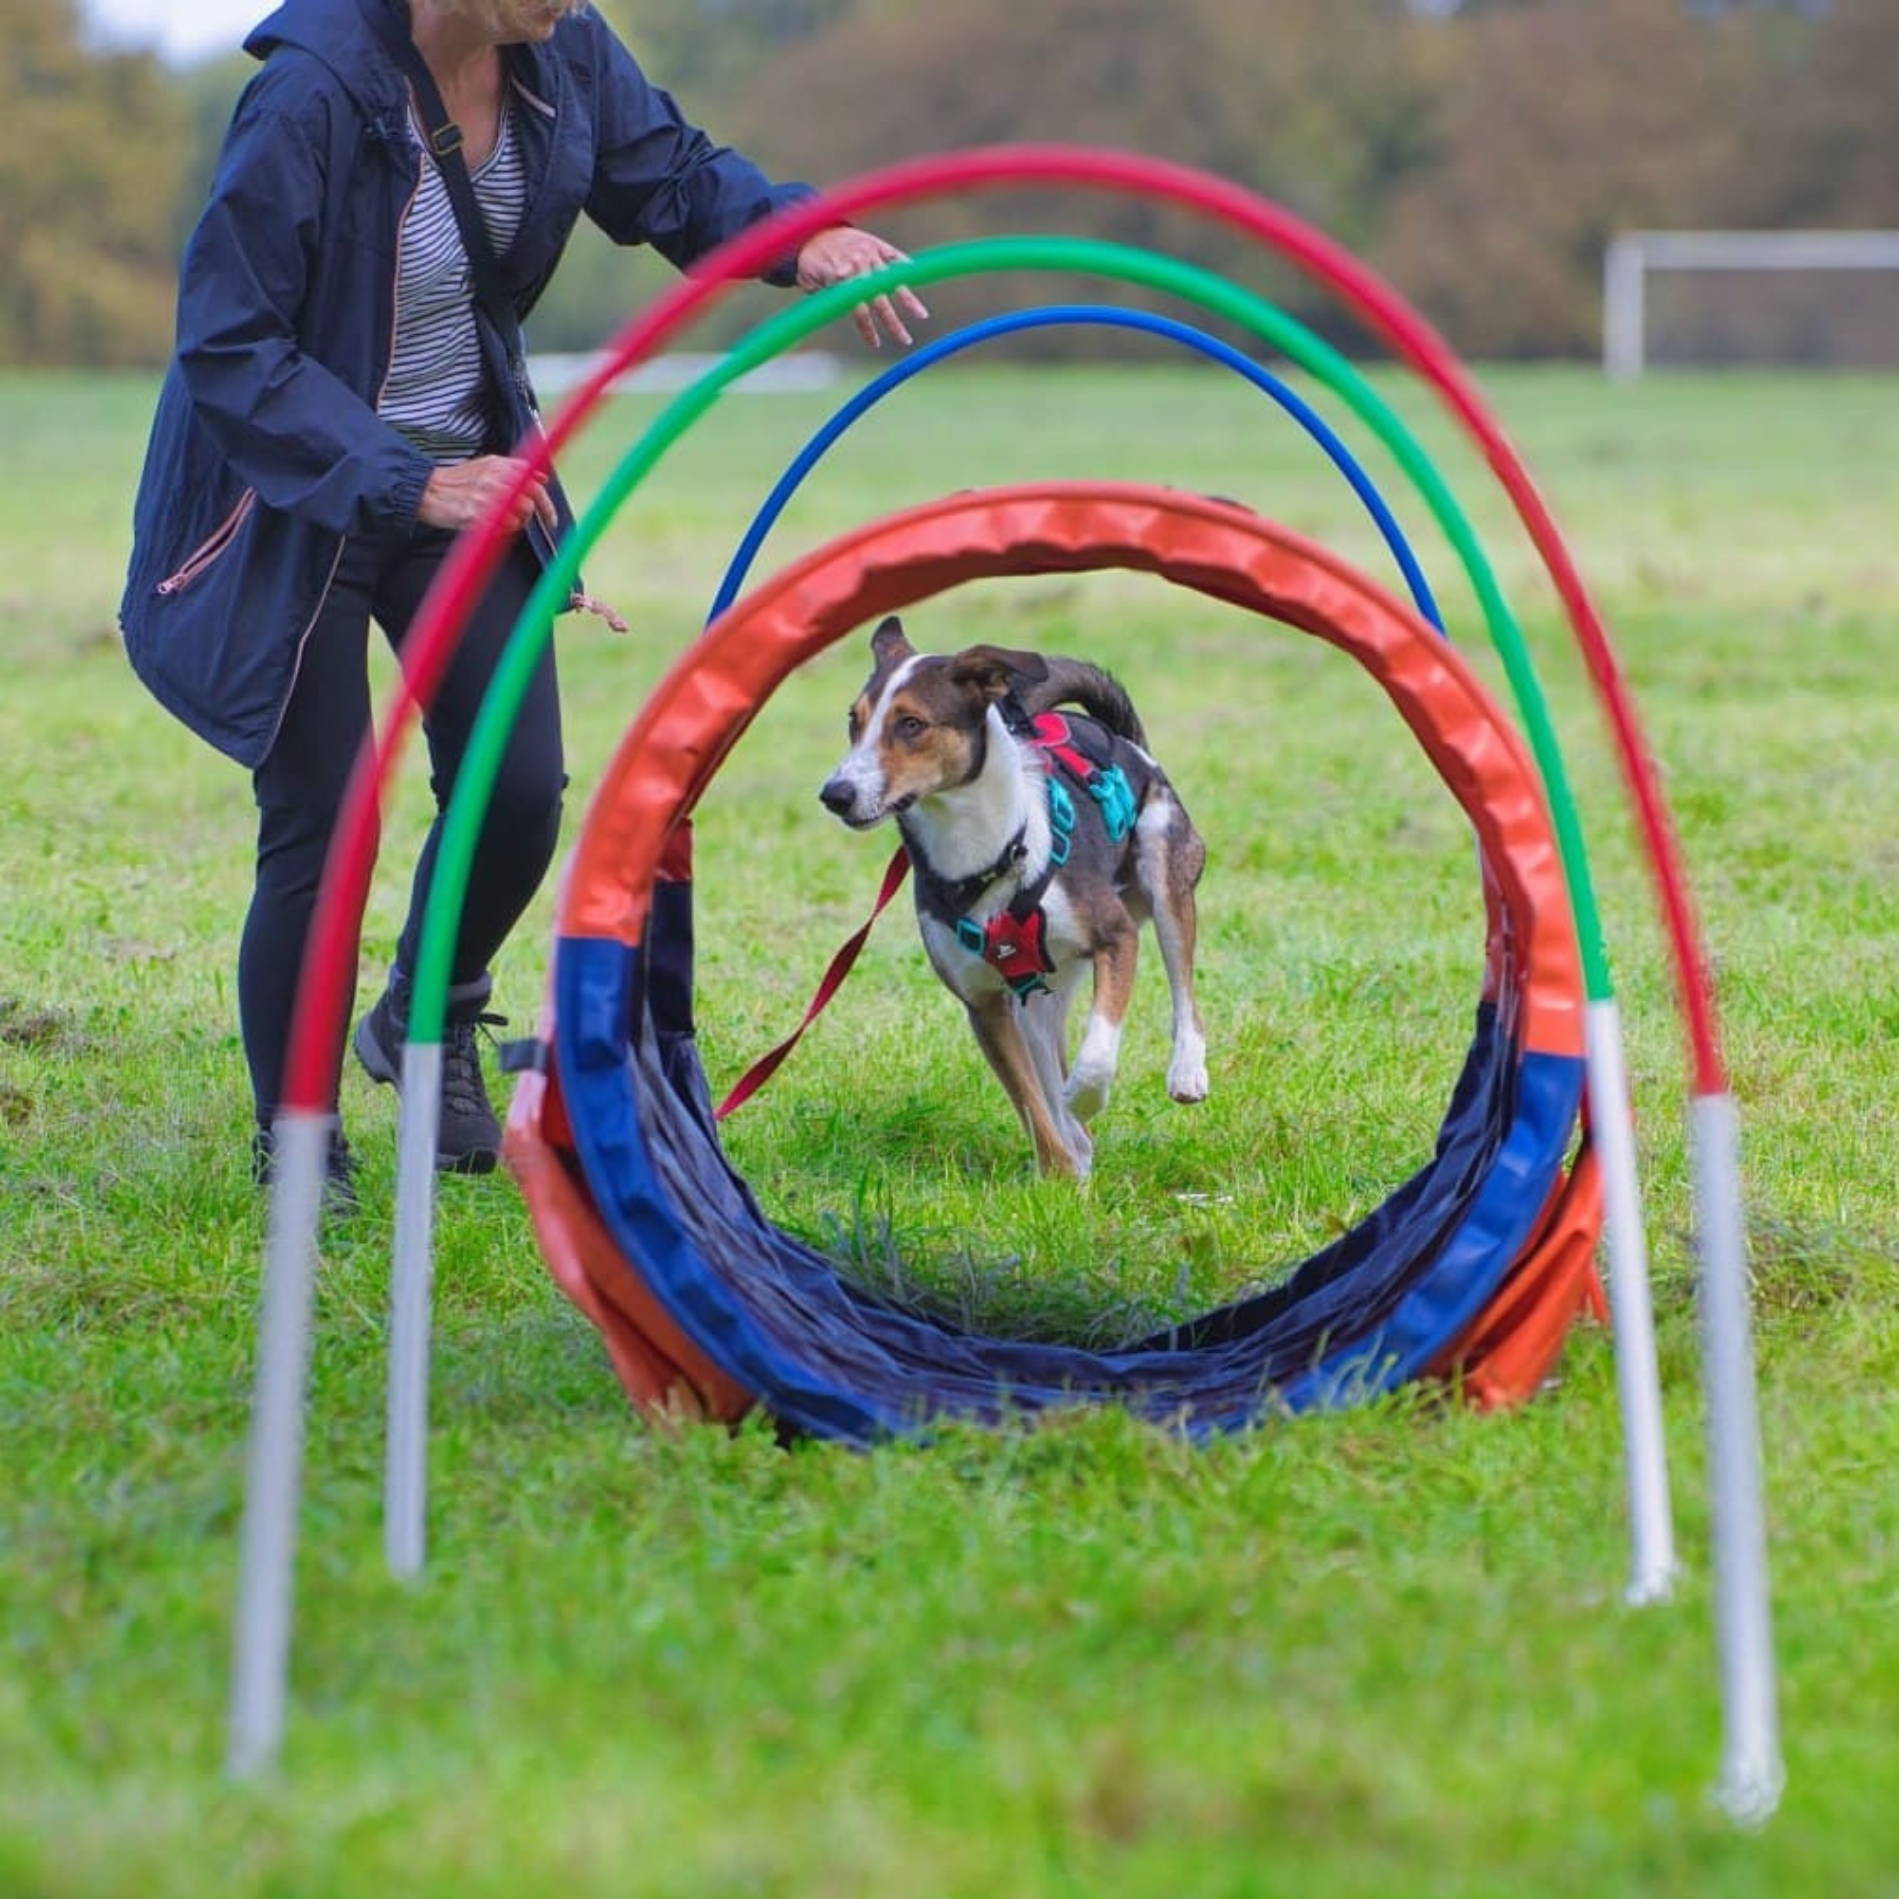 Romanian rescue dog doing hoopers dog sport